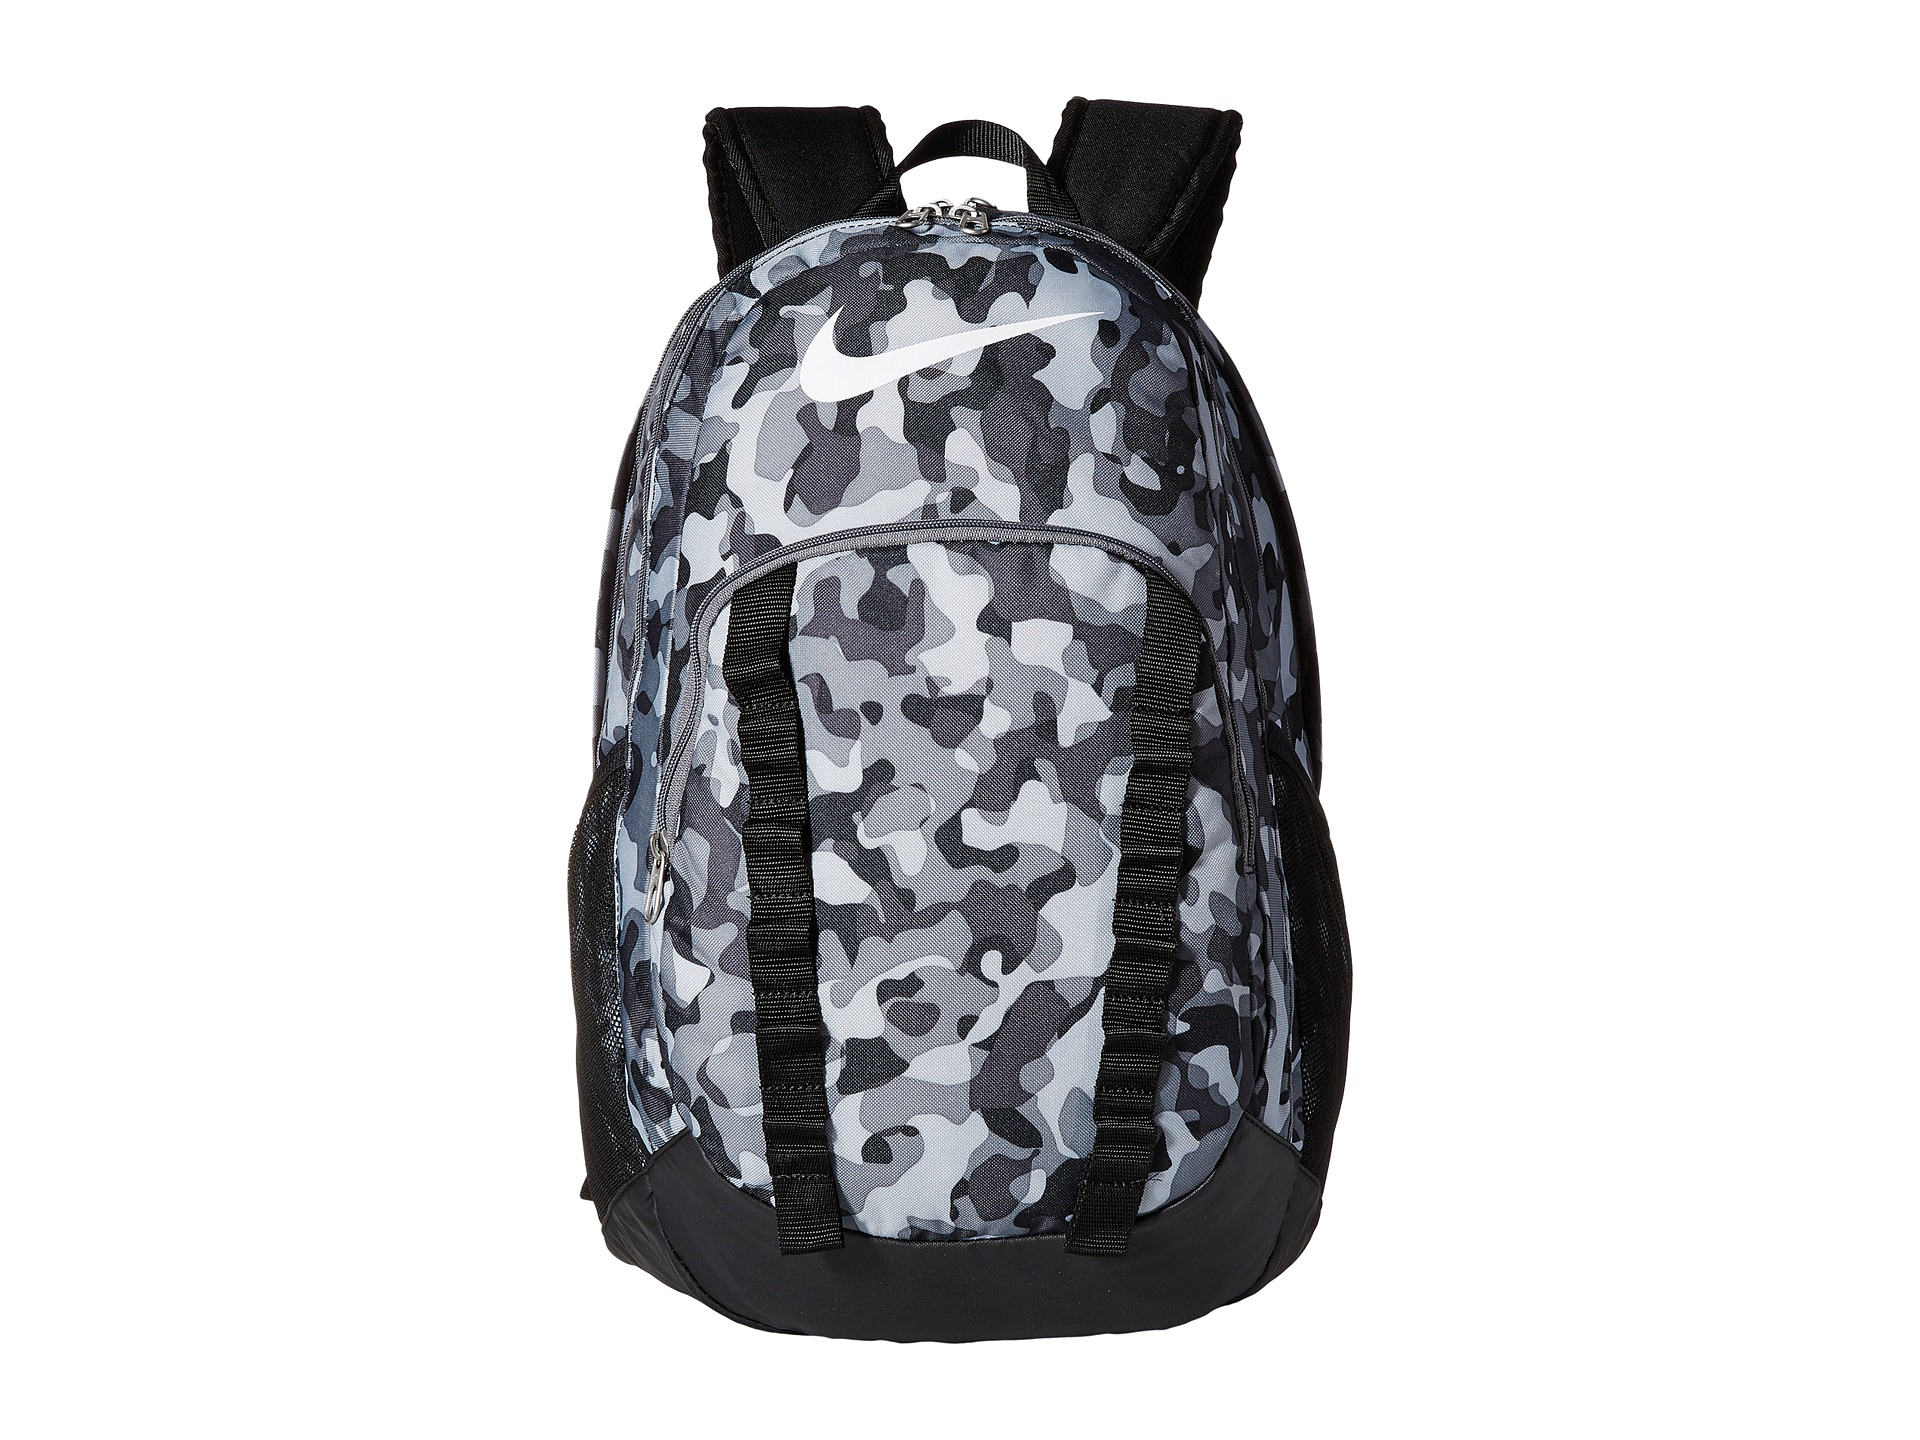 Lyst - Nike Brasilia 7 Backpack Graphic Xl in Gray